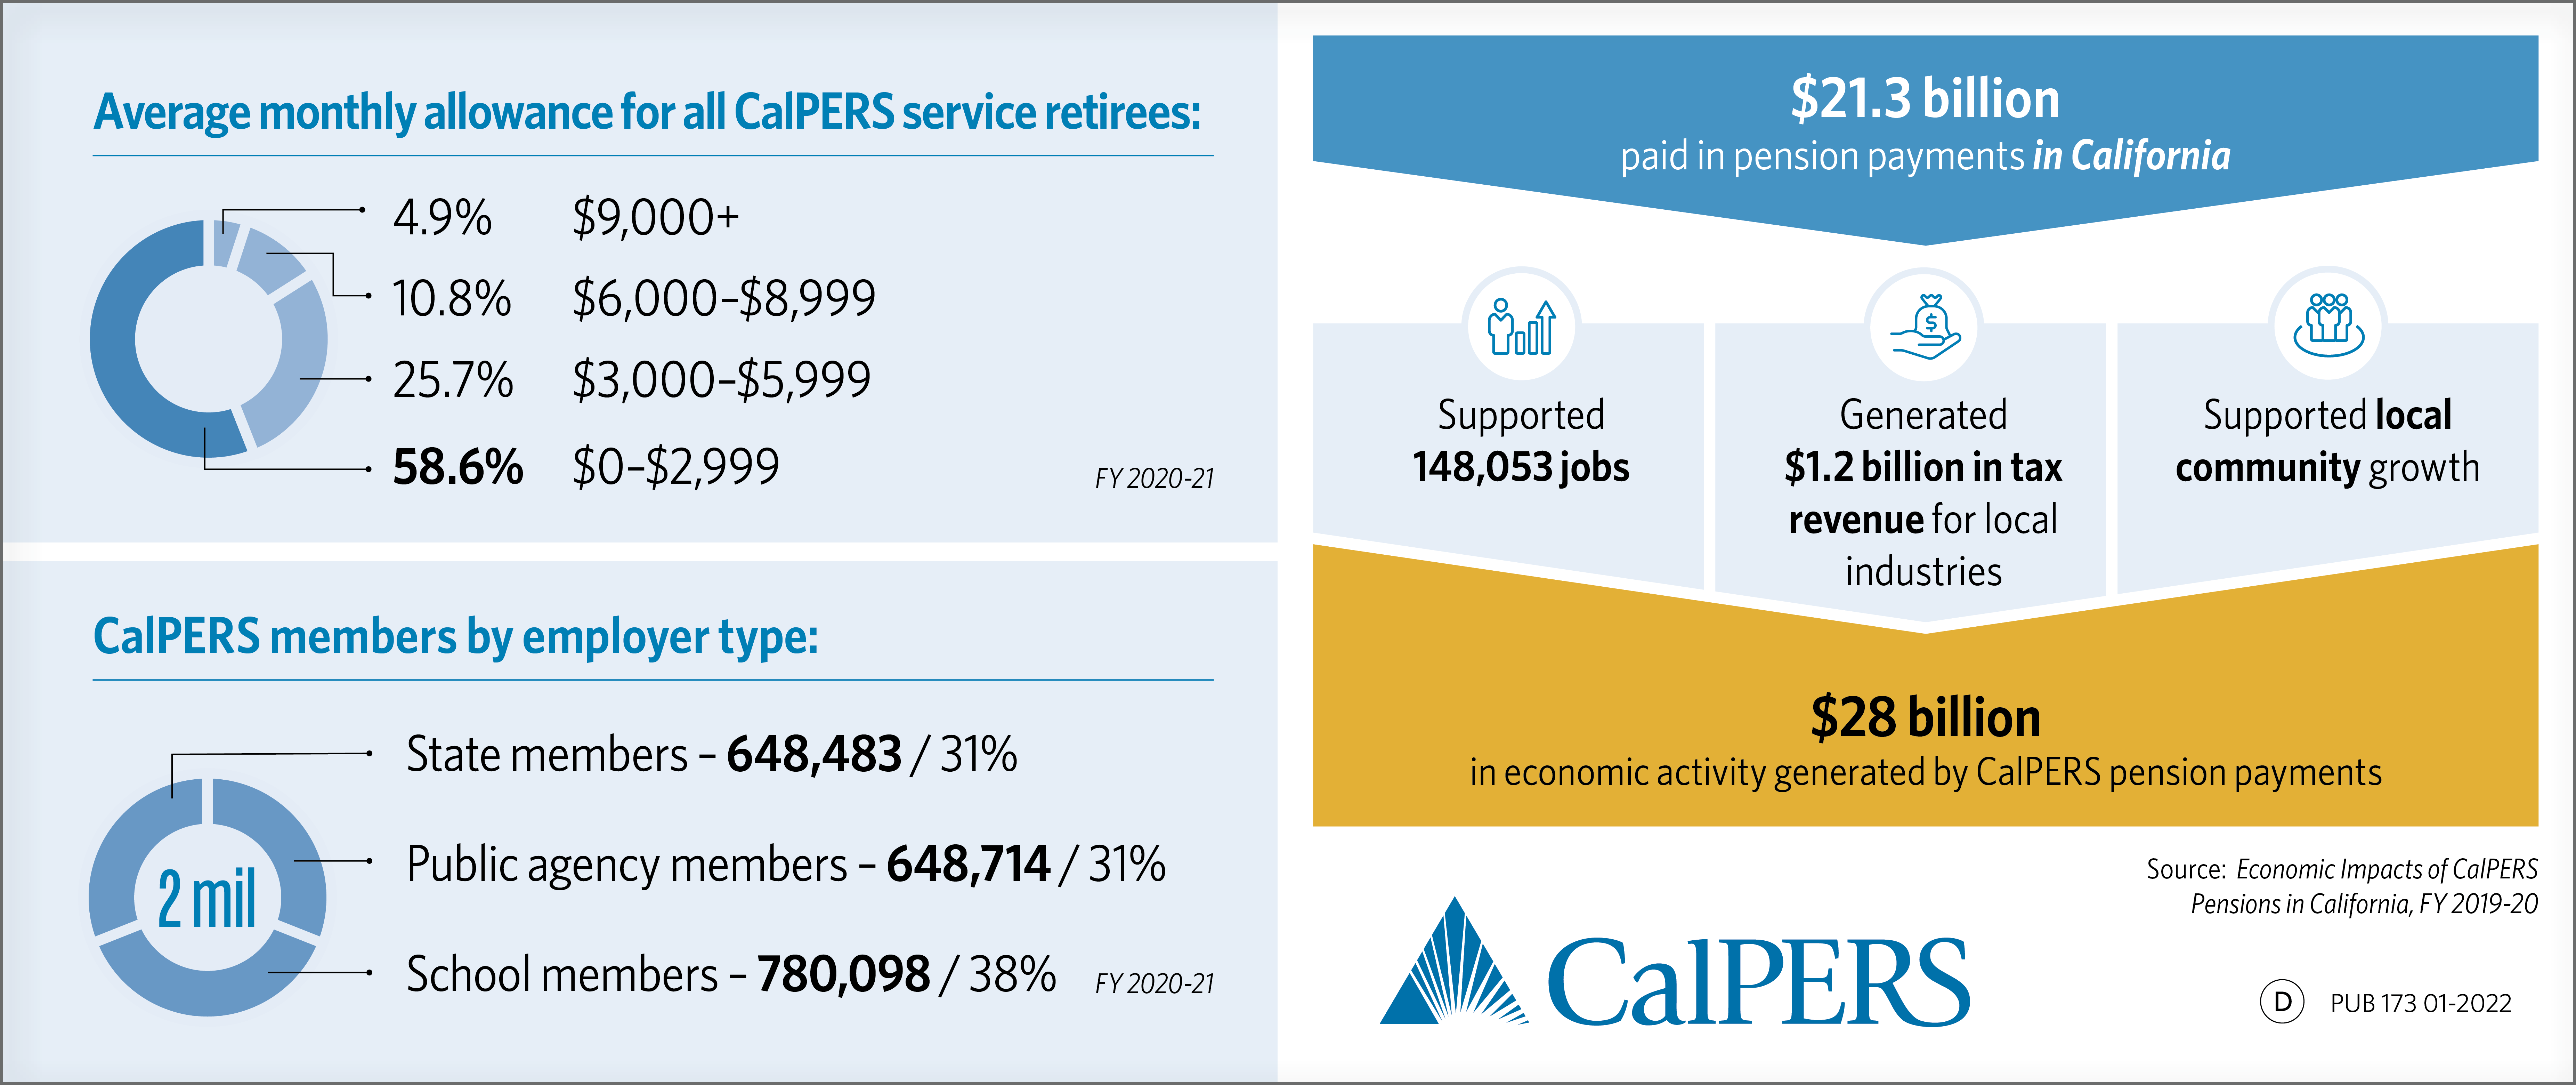 Who Pays for CalPERS Pensions? CalPERS